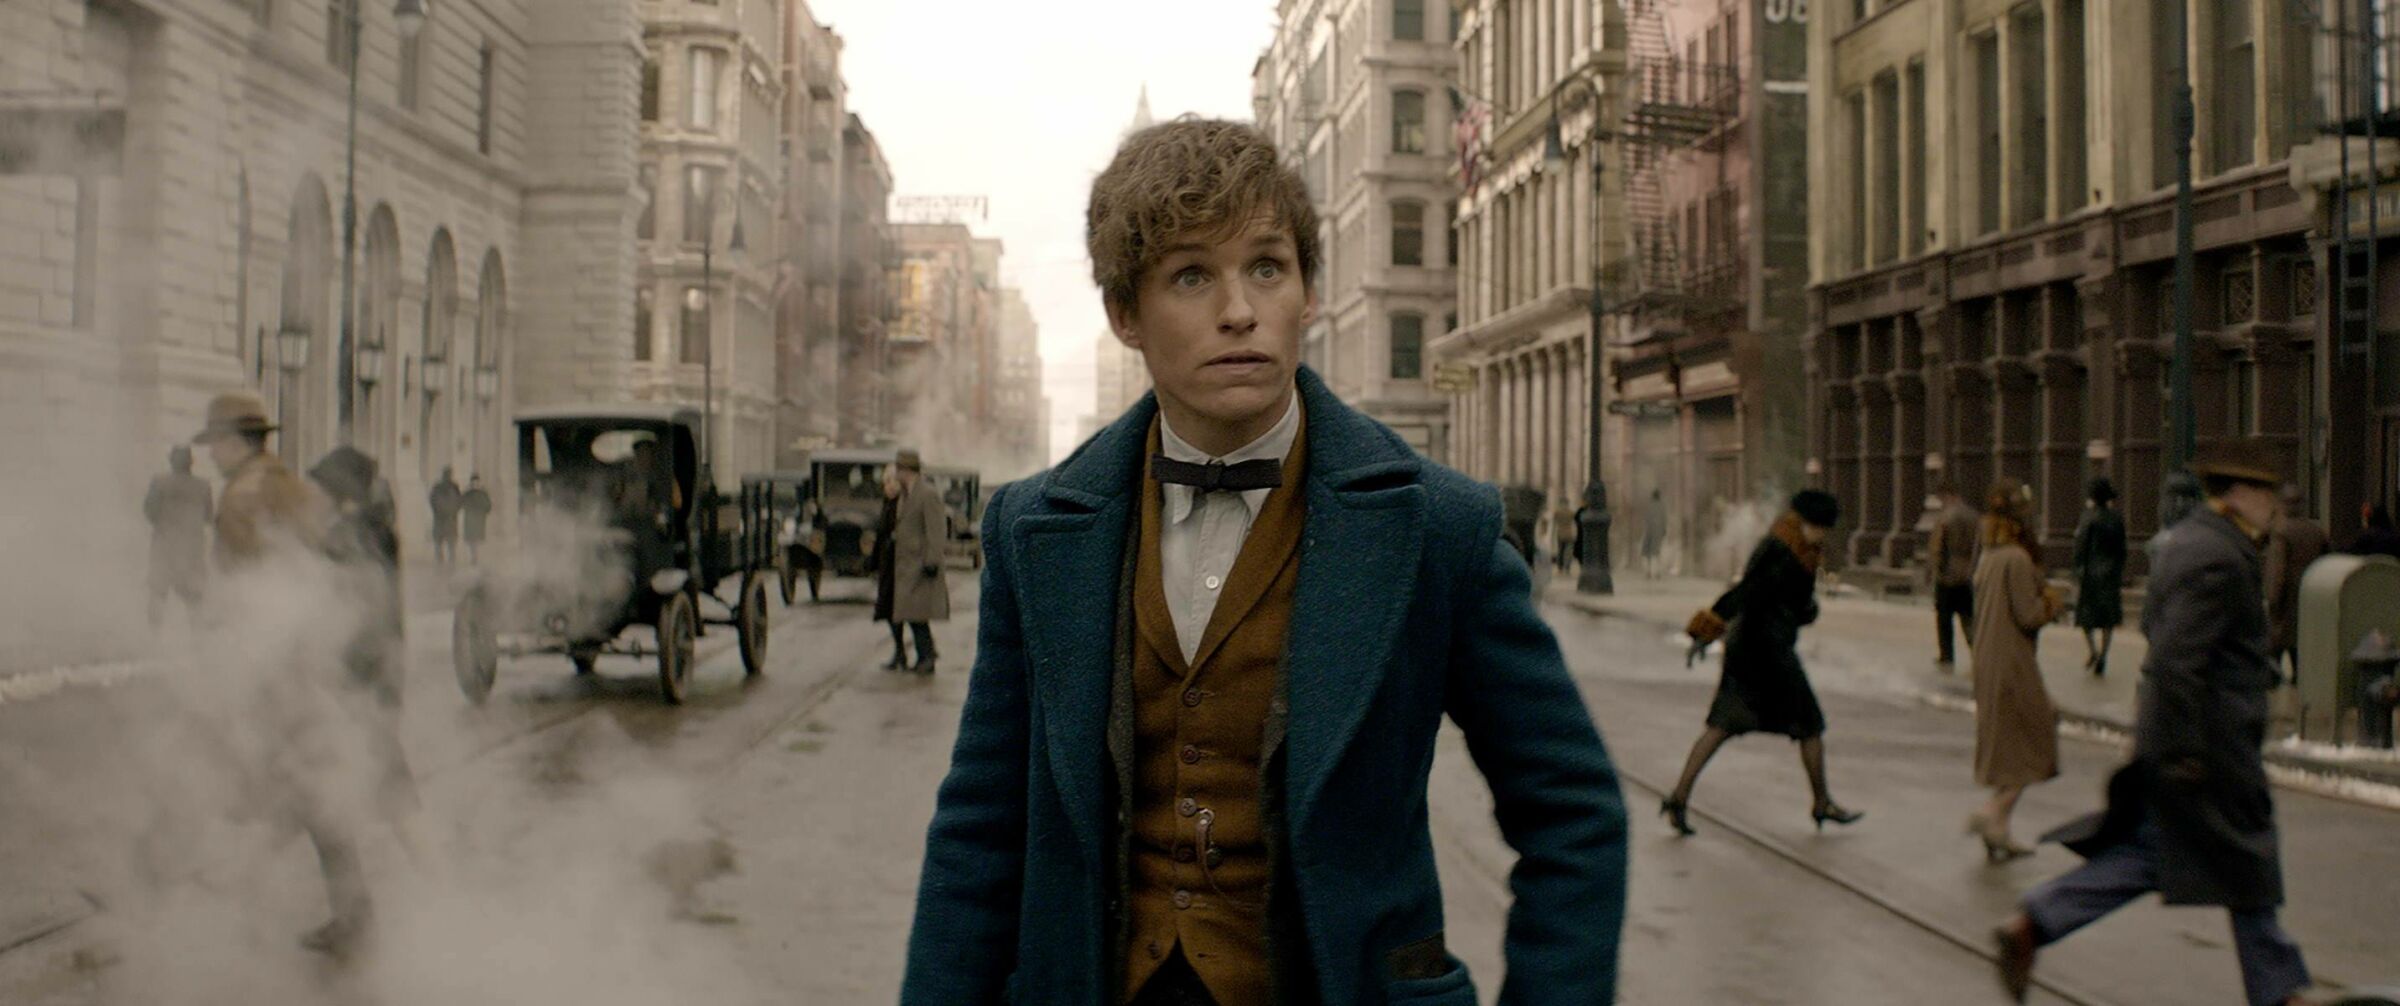 HBO GO 2565 Fantastic Beasts and Where to Find Them